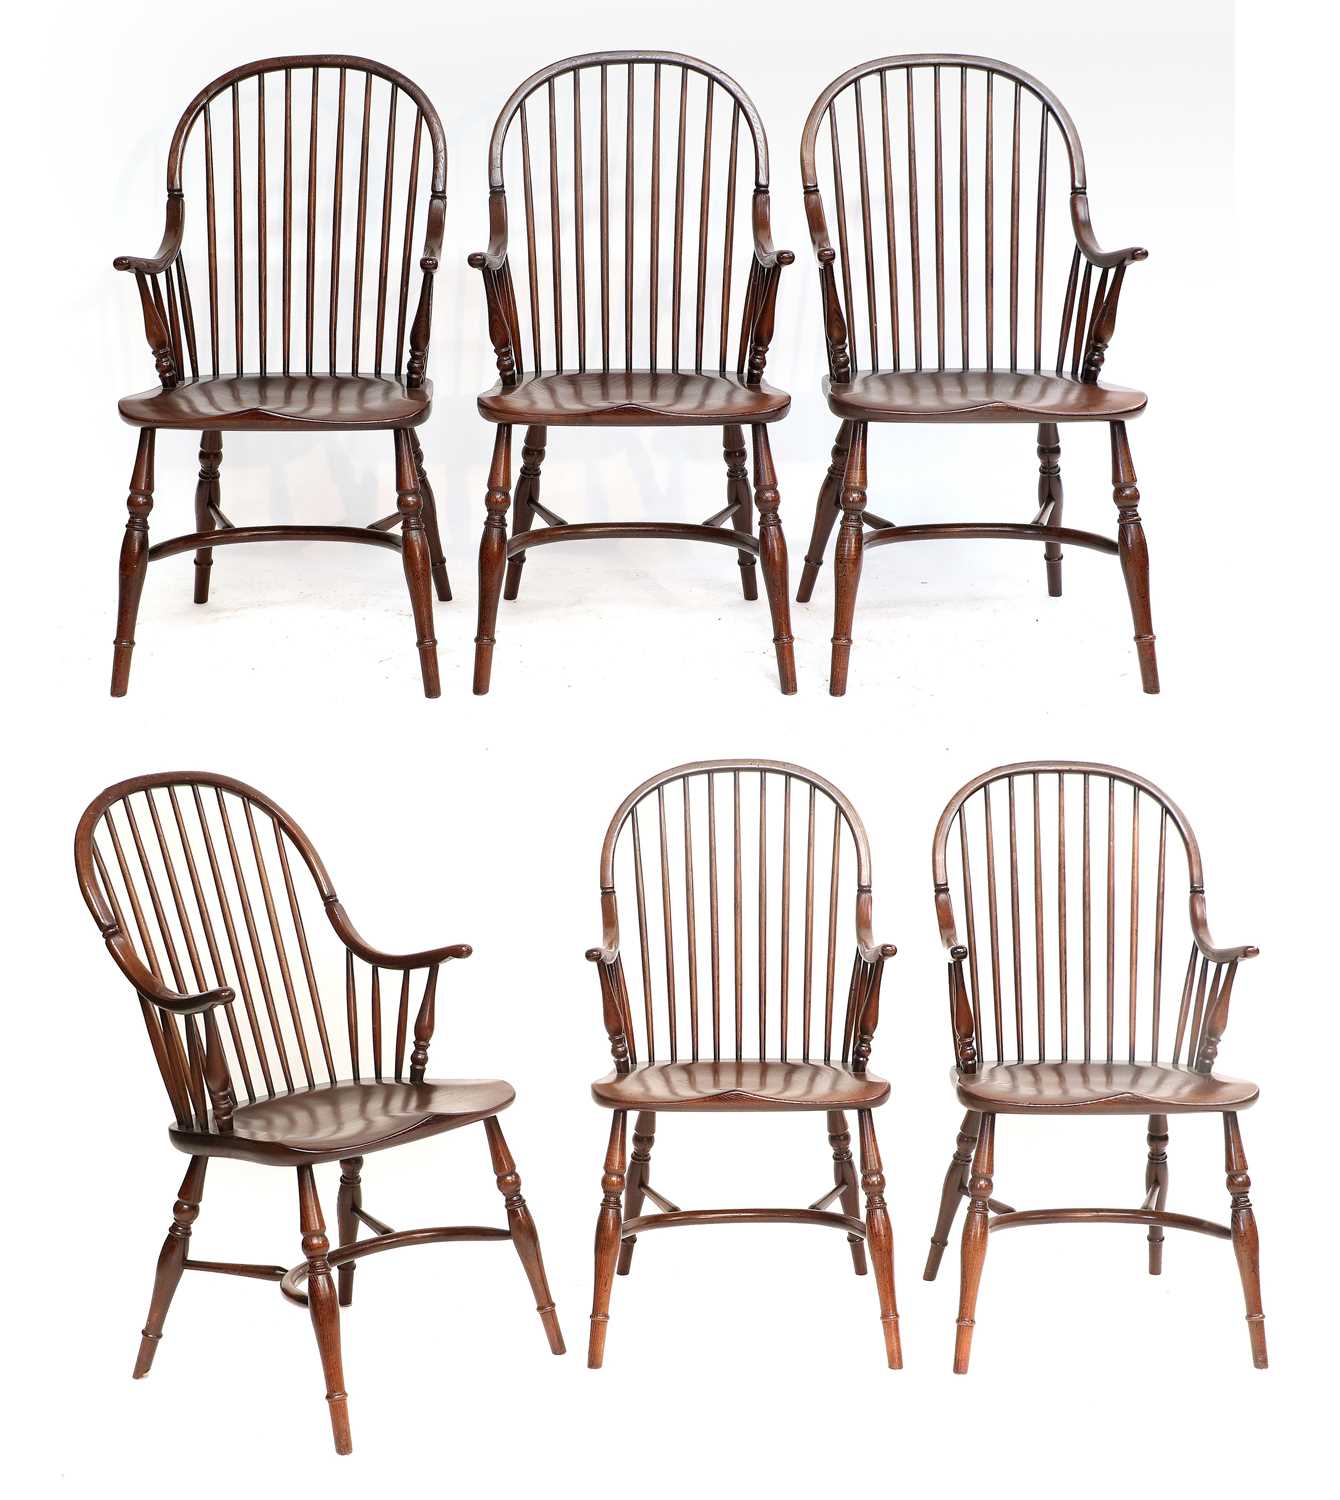 A Set of Six Stained Oak/Ash Windsor-Style Armchairs, of recent date, each with spindle back